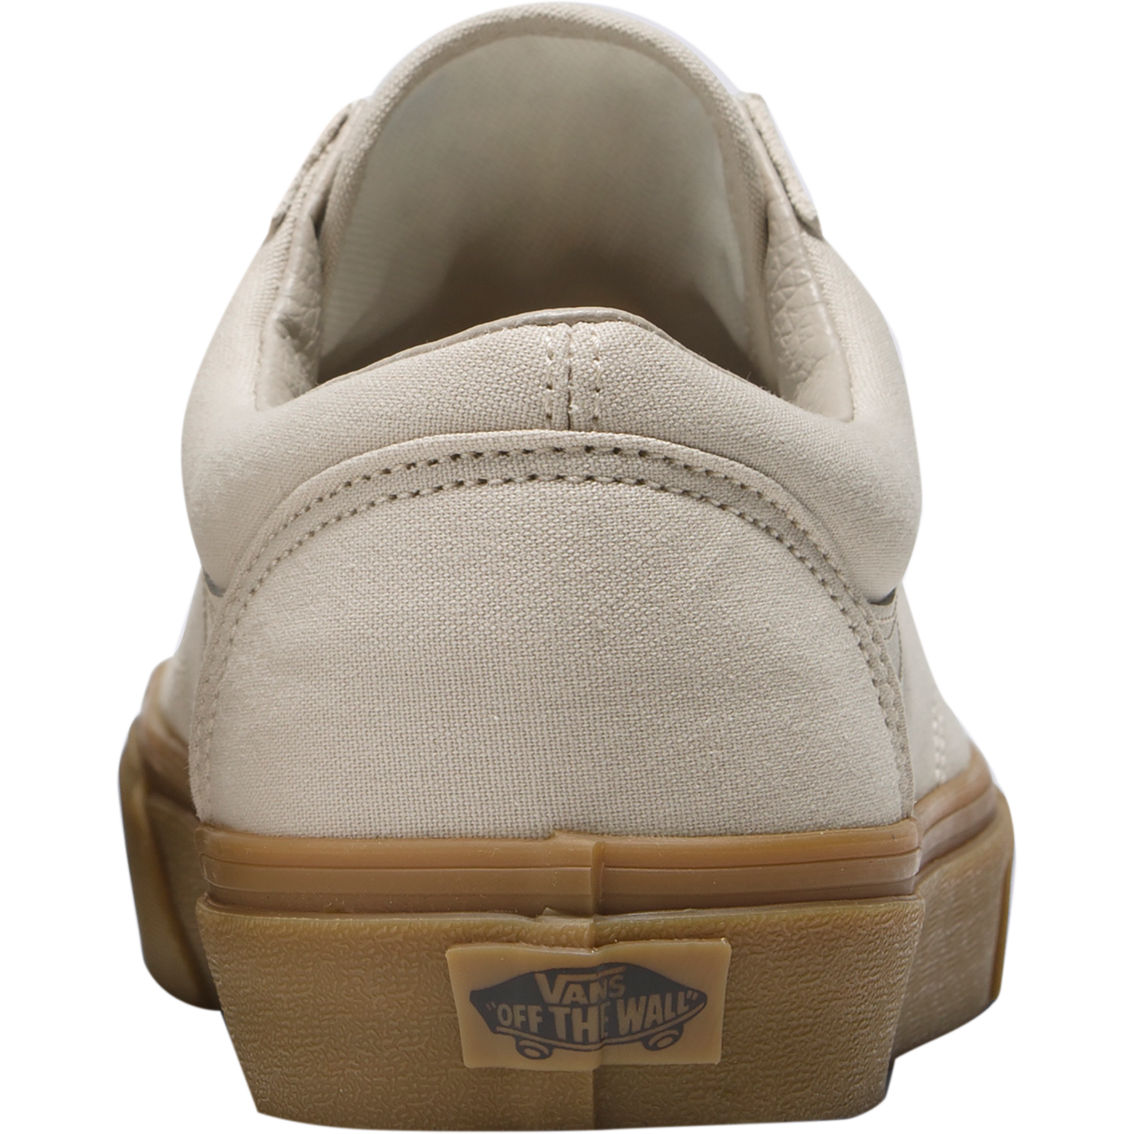 Vans Style 36 Shoes - Image 4 of 4